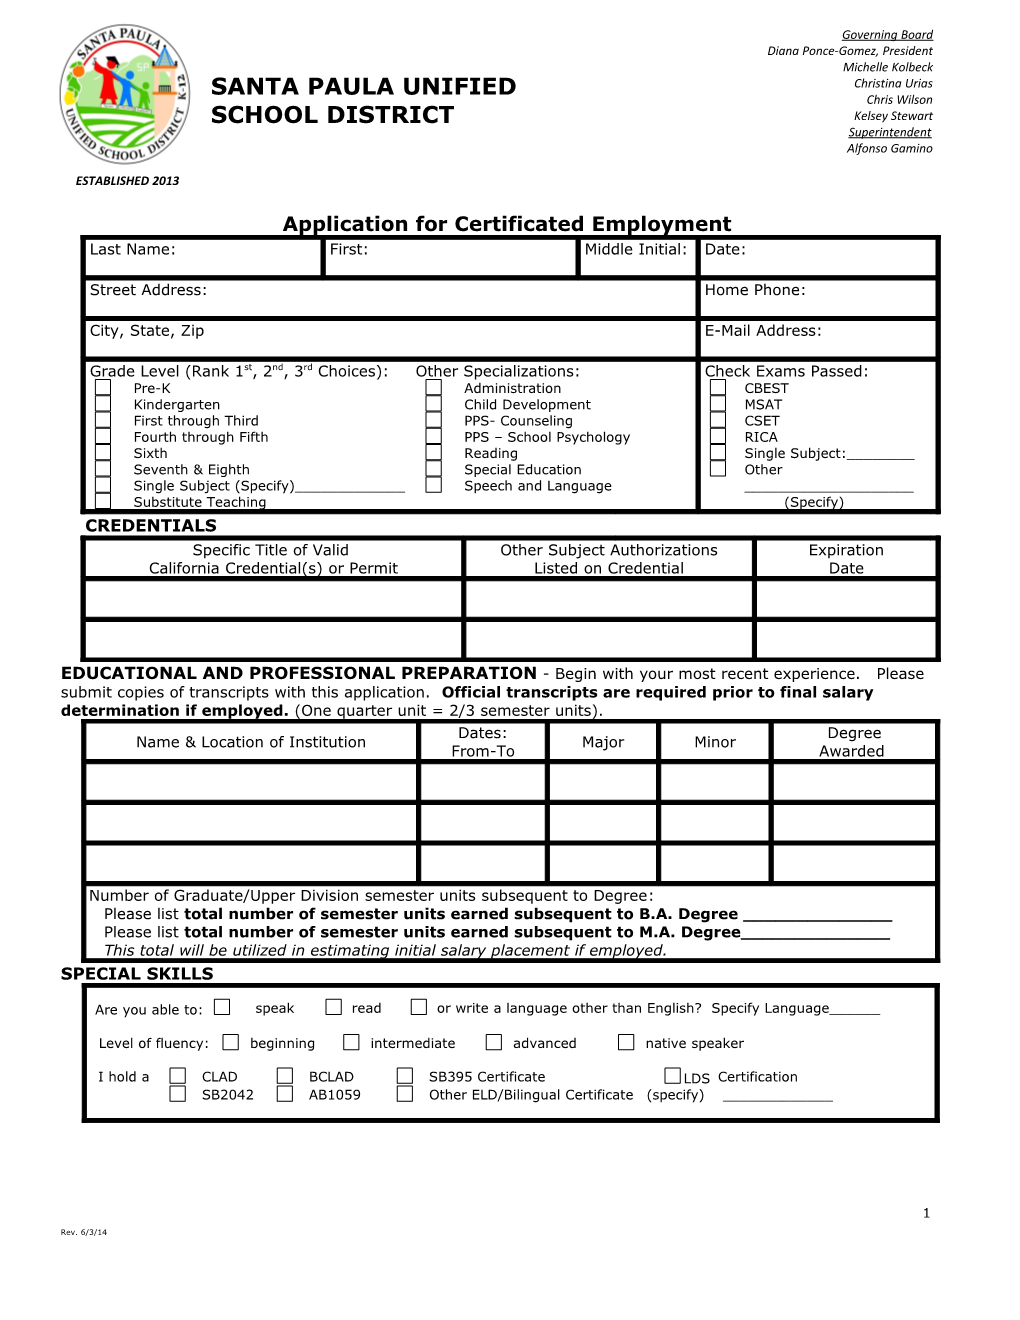 Application for Certificated Employment